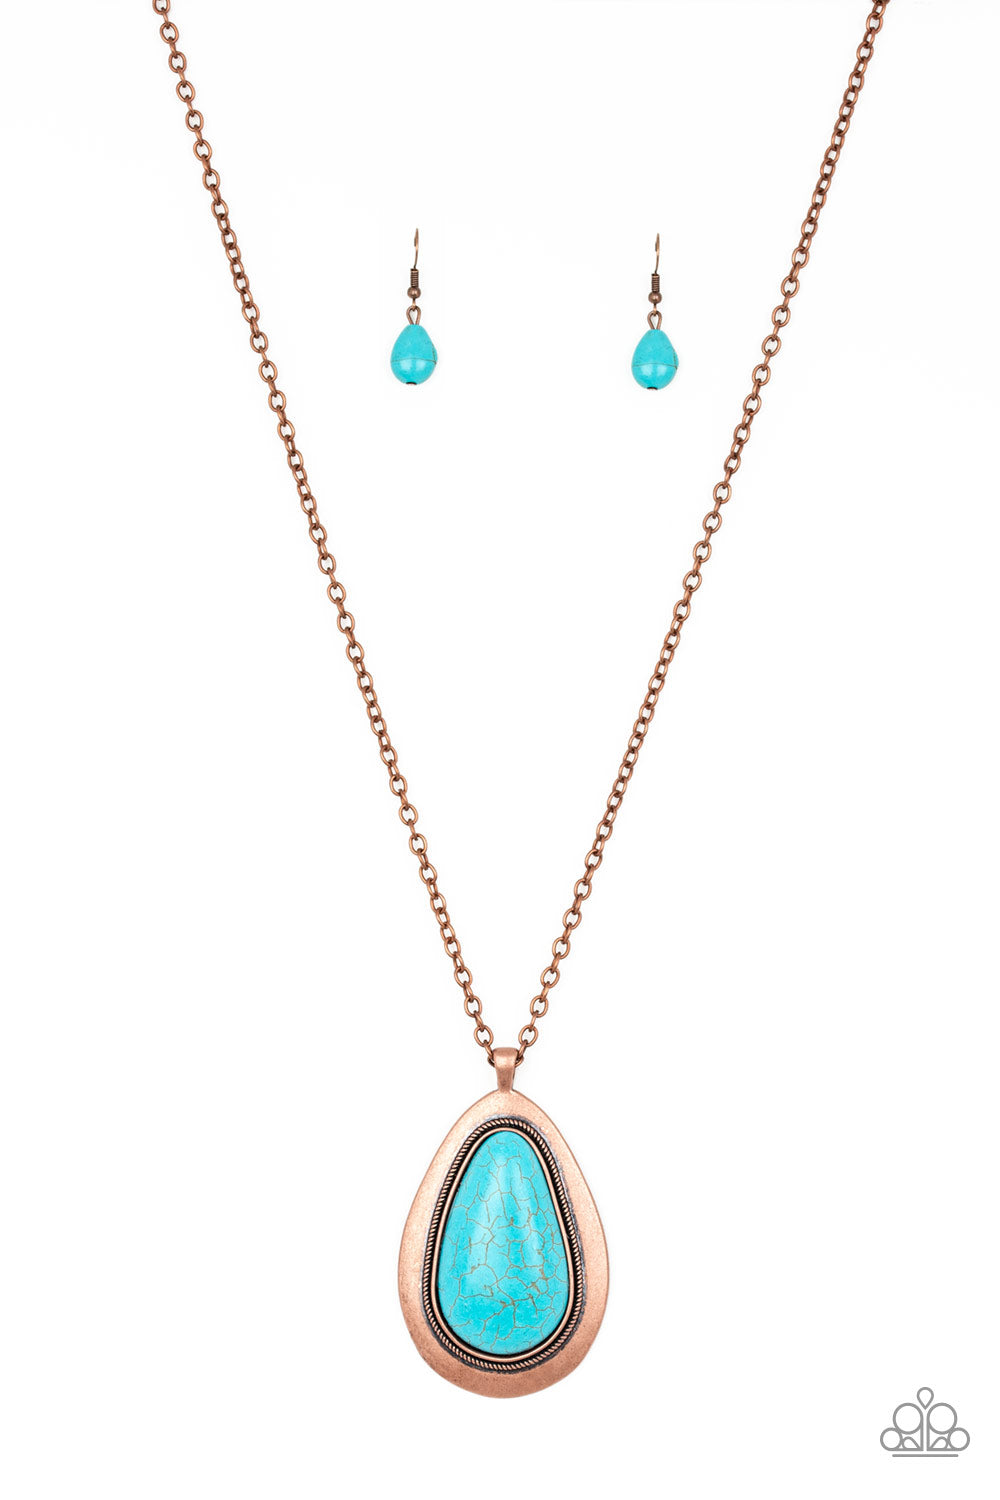 A dramatic turquoise stone teardrop is pressed into a glistening copper frame radiating with rustic patterns. The impressive pendant swings from the bottom of a lengthened copper chain for a seasonal look. Features an adjustable clasp closure.